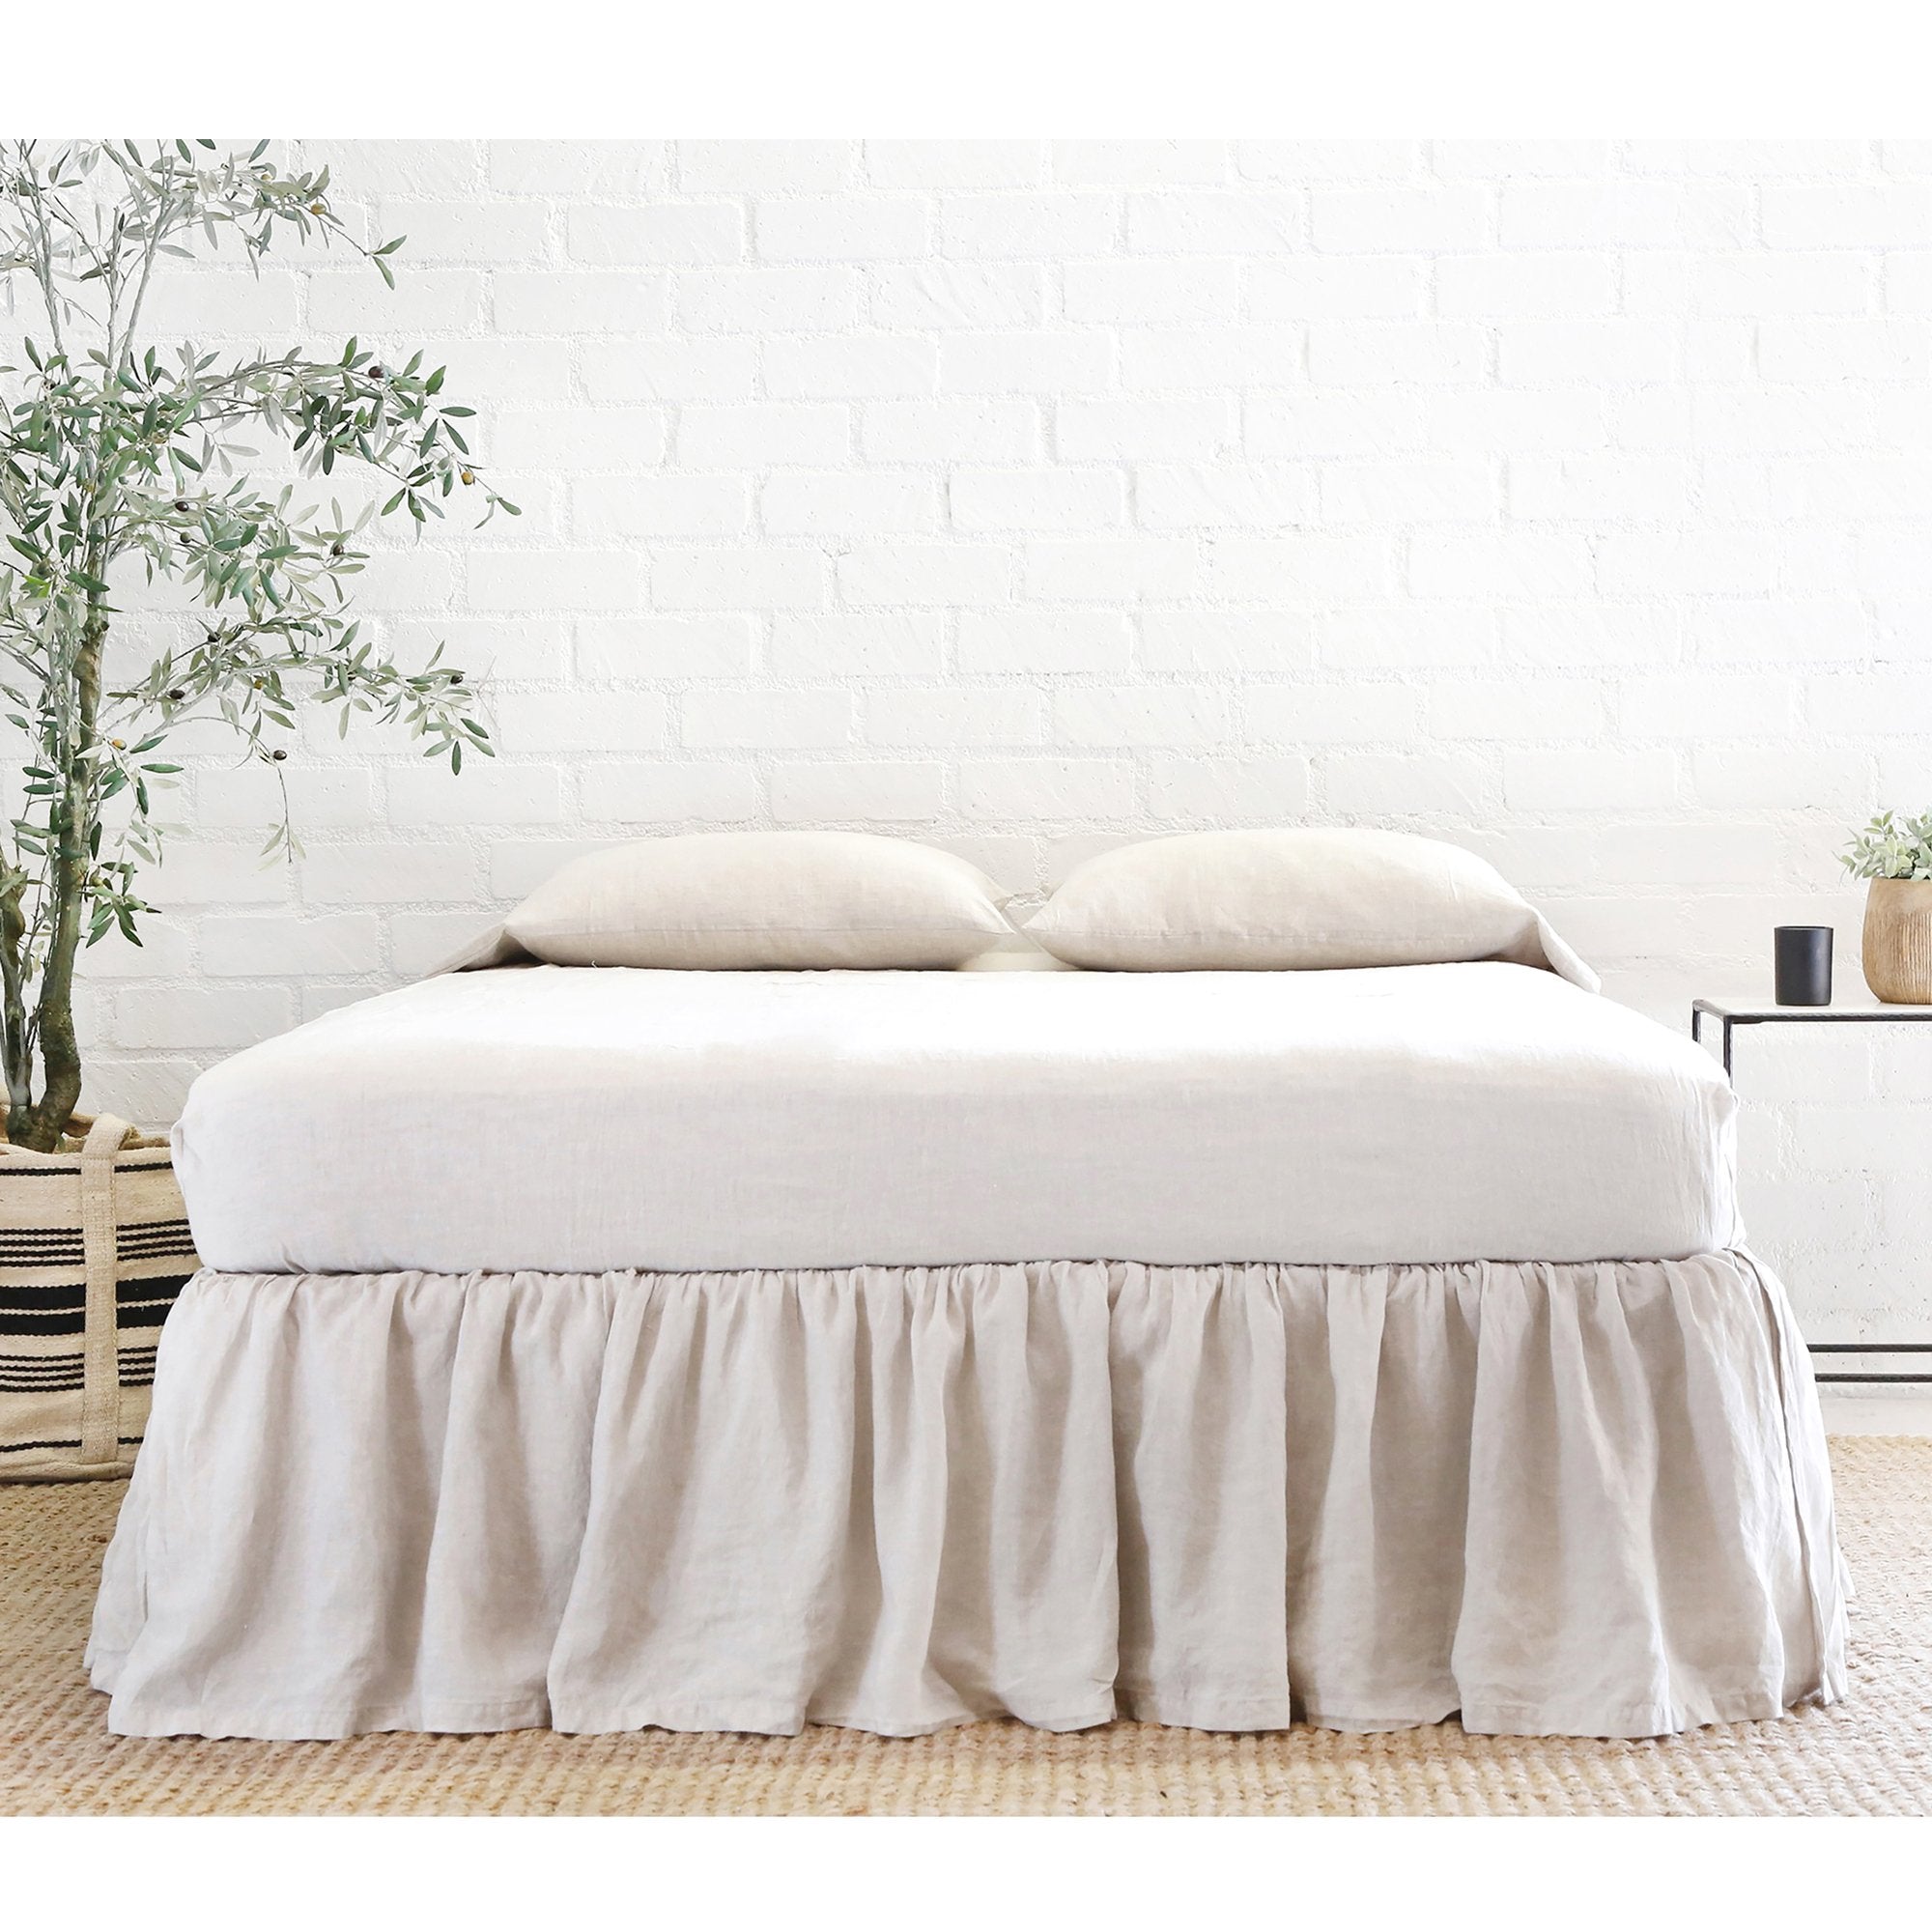 GATHERED LINEN BEDSKIRT - FLAX-Bed Skirts-Pom Pom at Home